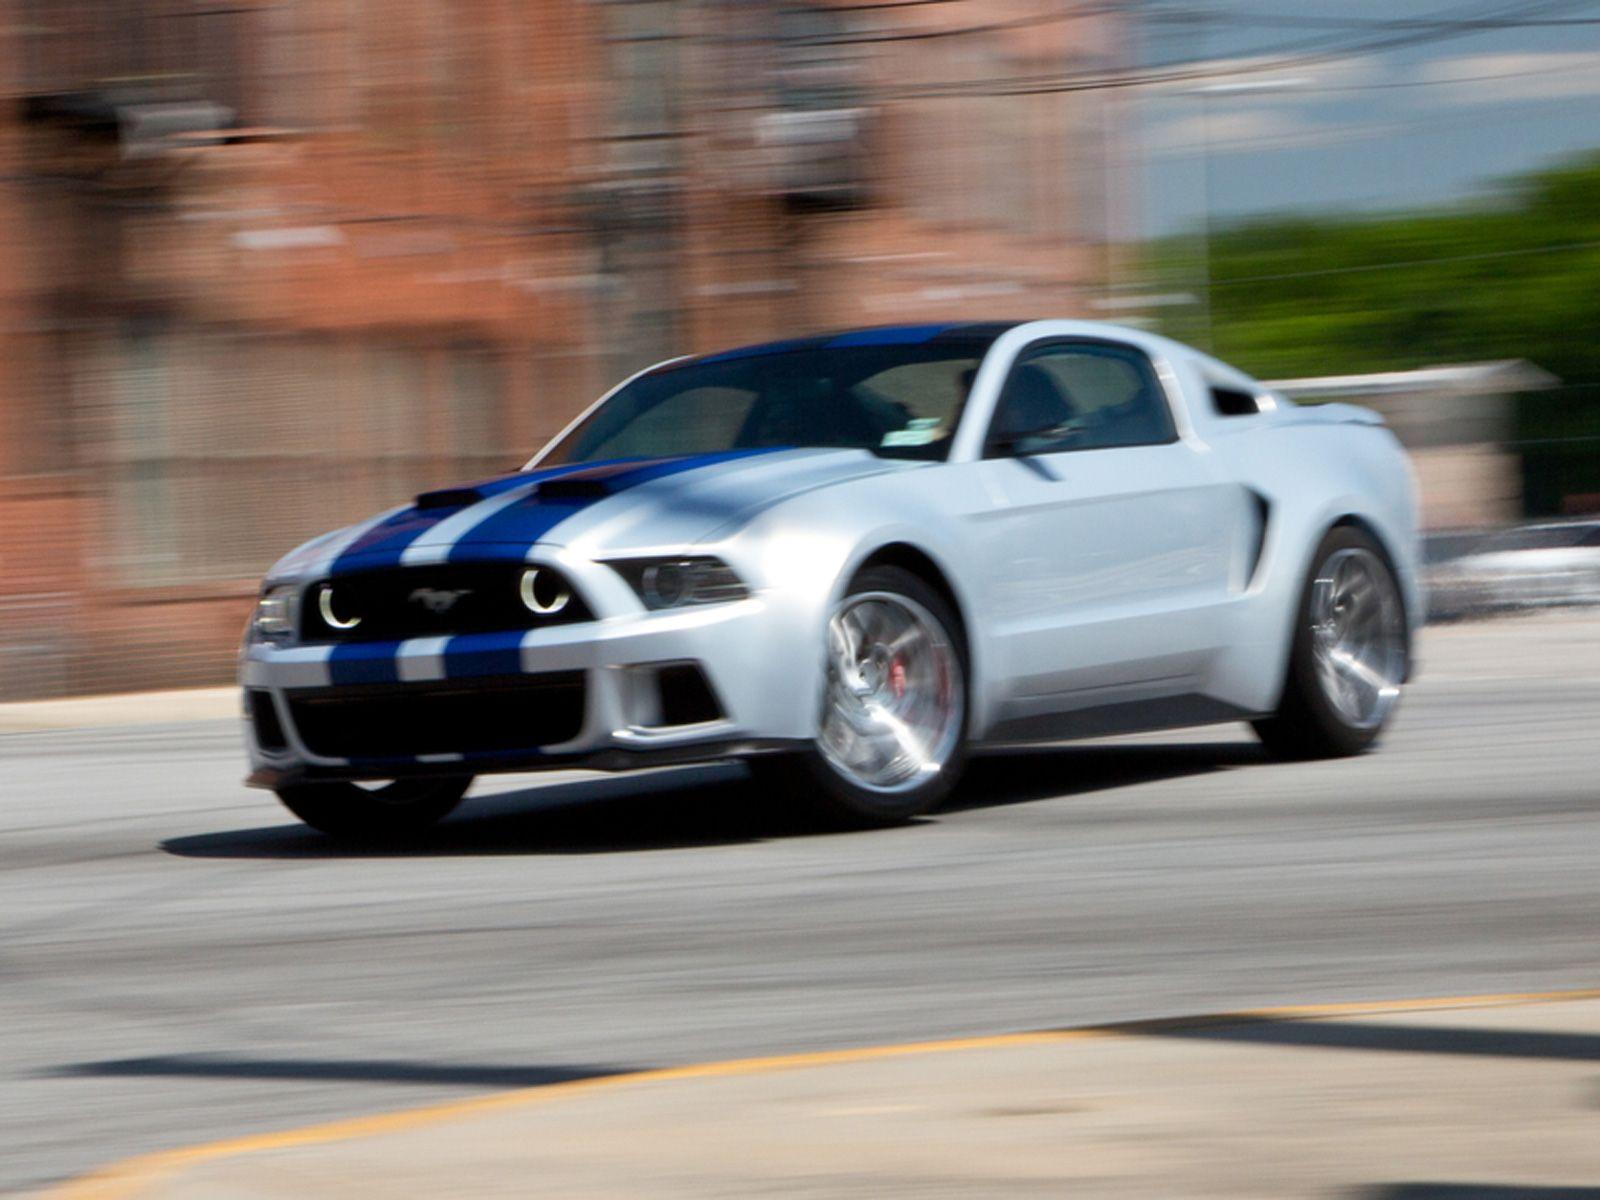 One Off Mustang Hero Car Will Star In ”Need For Speed” Movie Photo